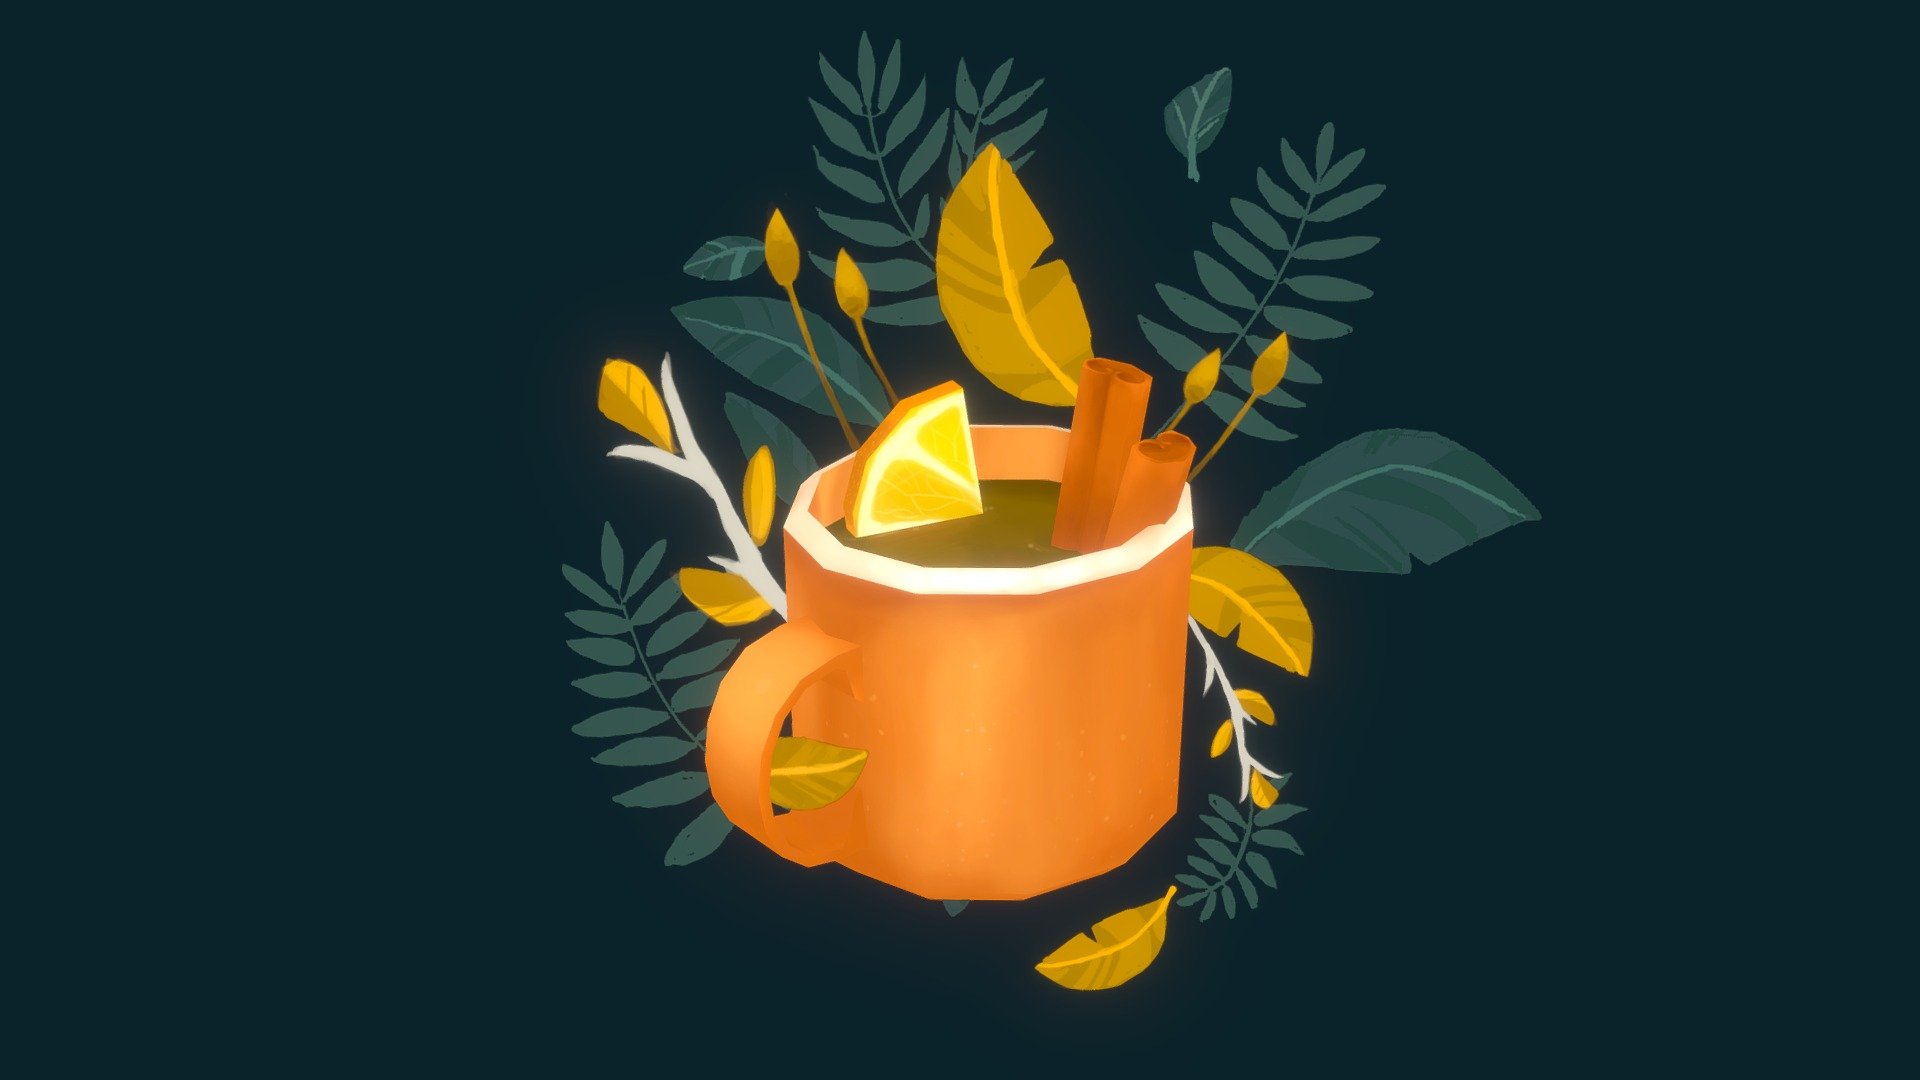 I simply fell in love with this illustration by @alittlejess and had to try my hand at making it 3D! It's currently spring here in my country, and I'm already missing cold evenings and spicy hot drinks :